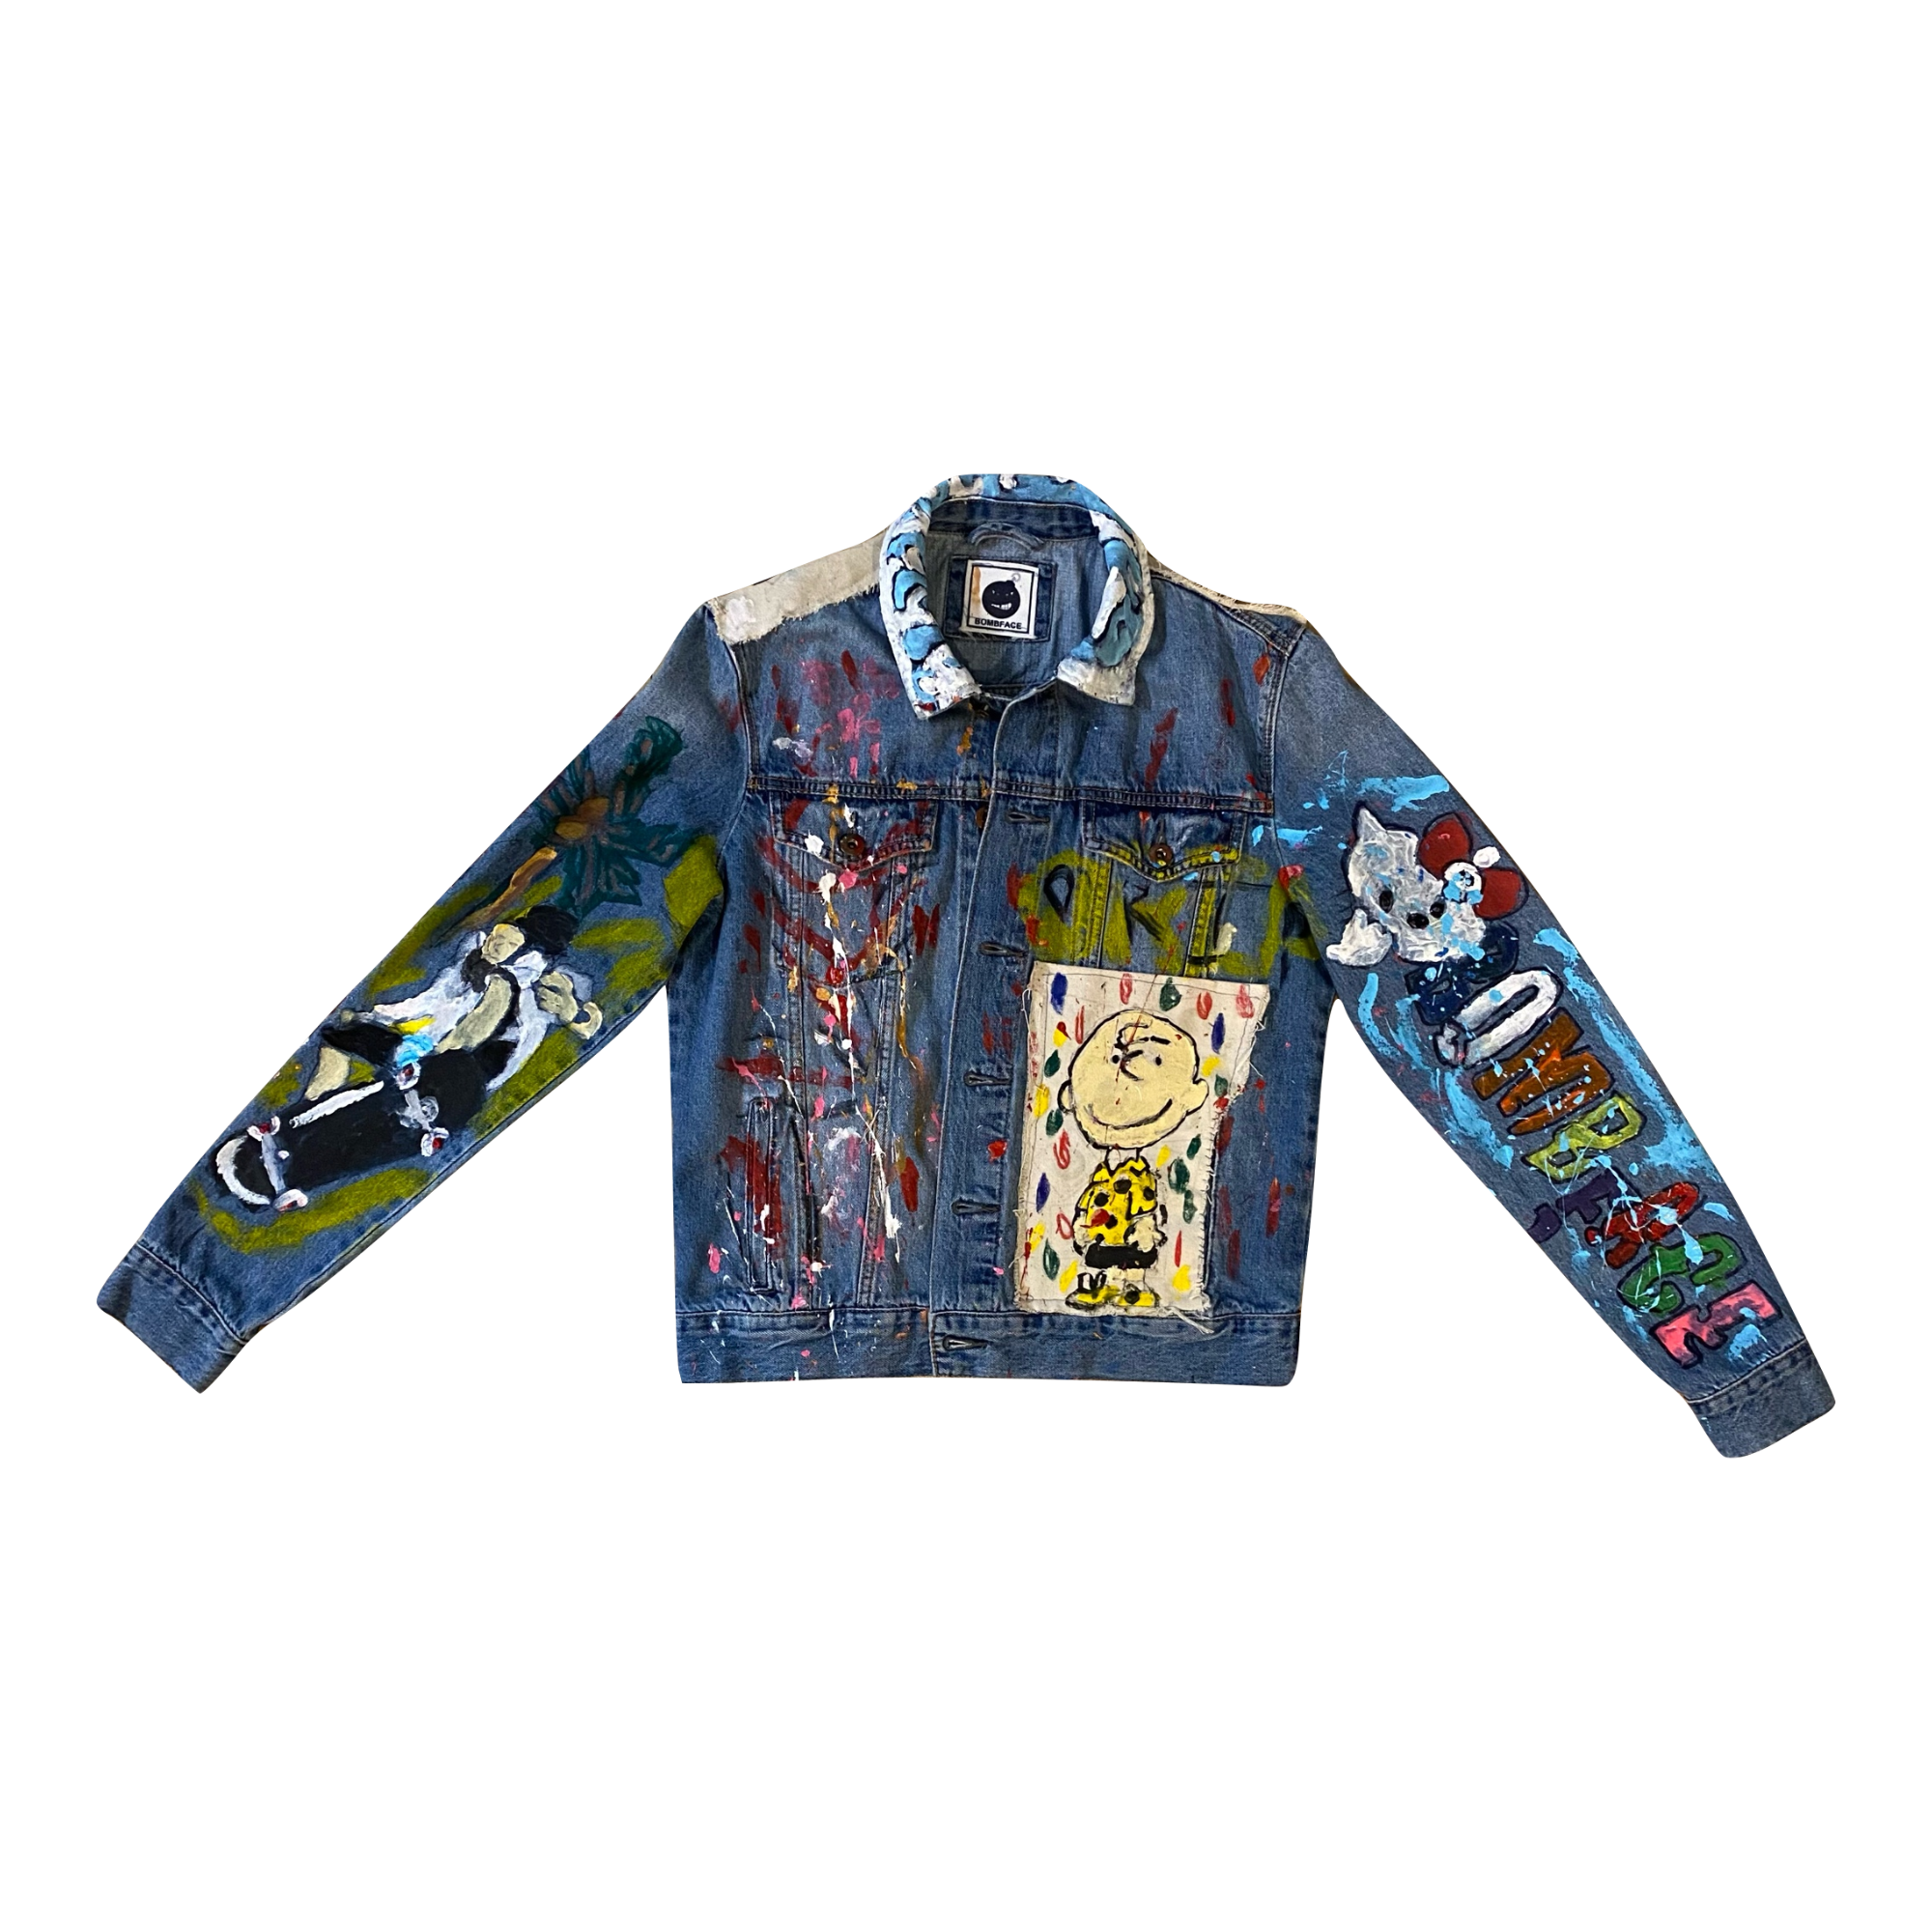 BombFace Custom Jacket. Made to express color and style. Custom Jacket with acrylic paint. Custom Jackets for a small build person. This is a small custom jacket. 